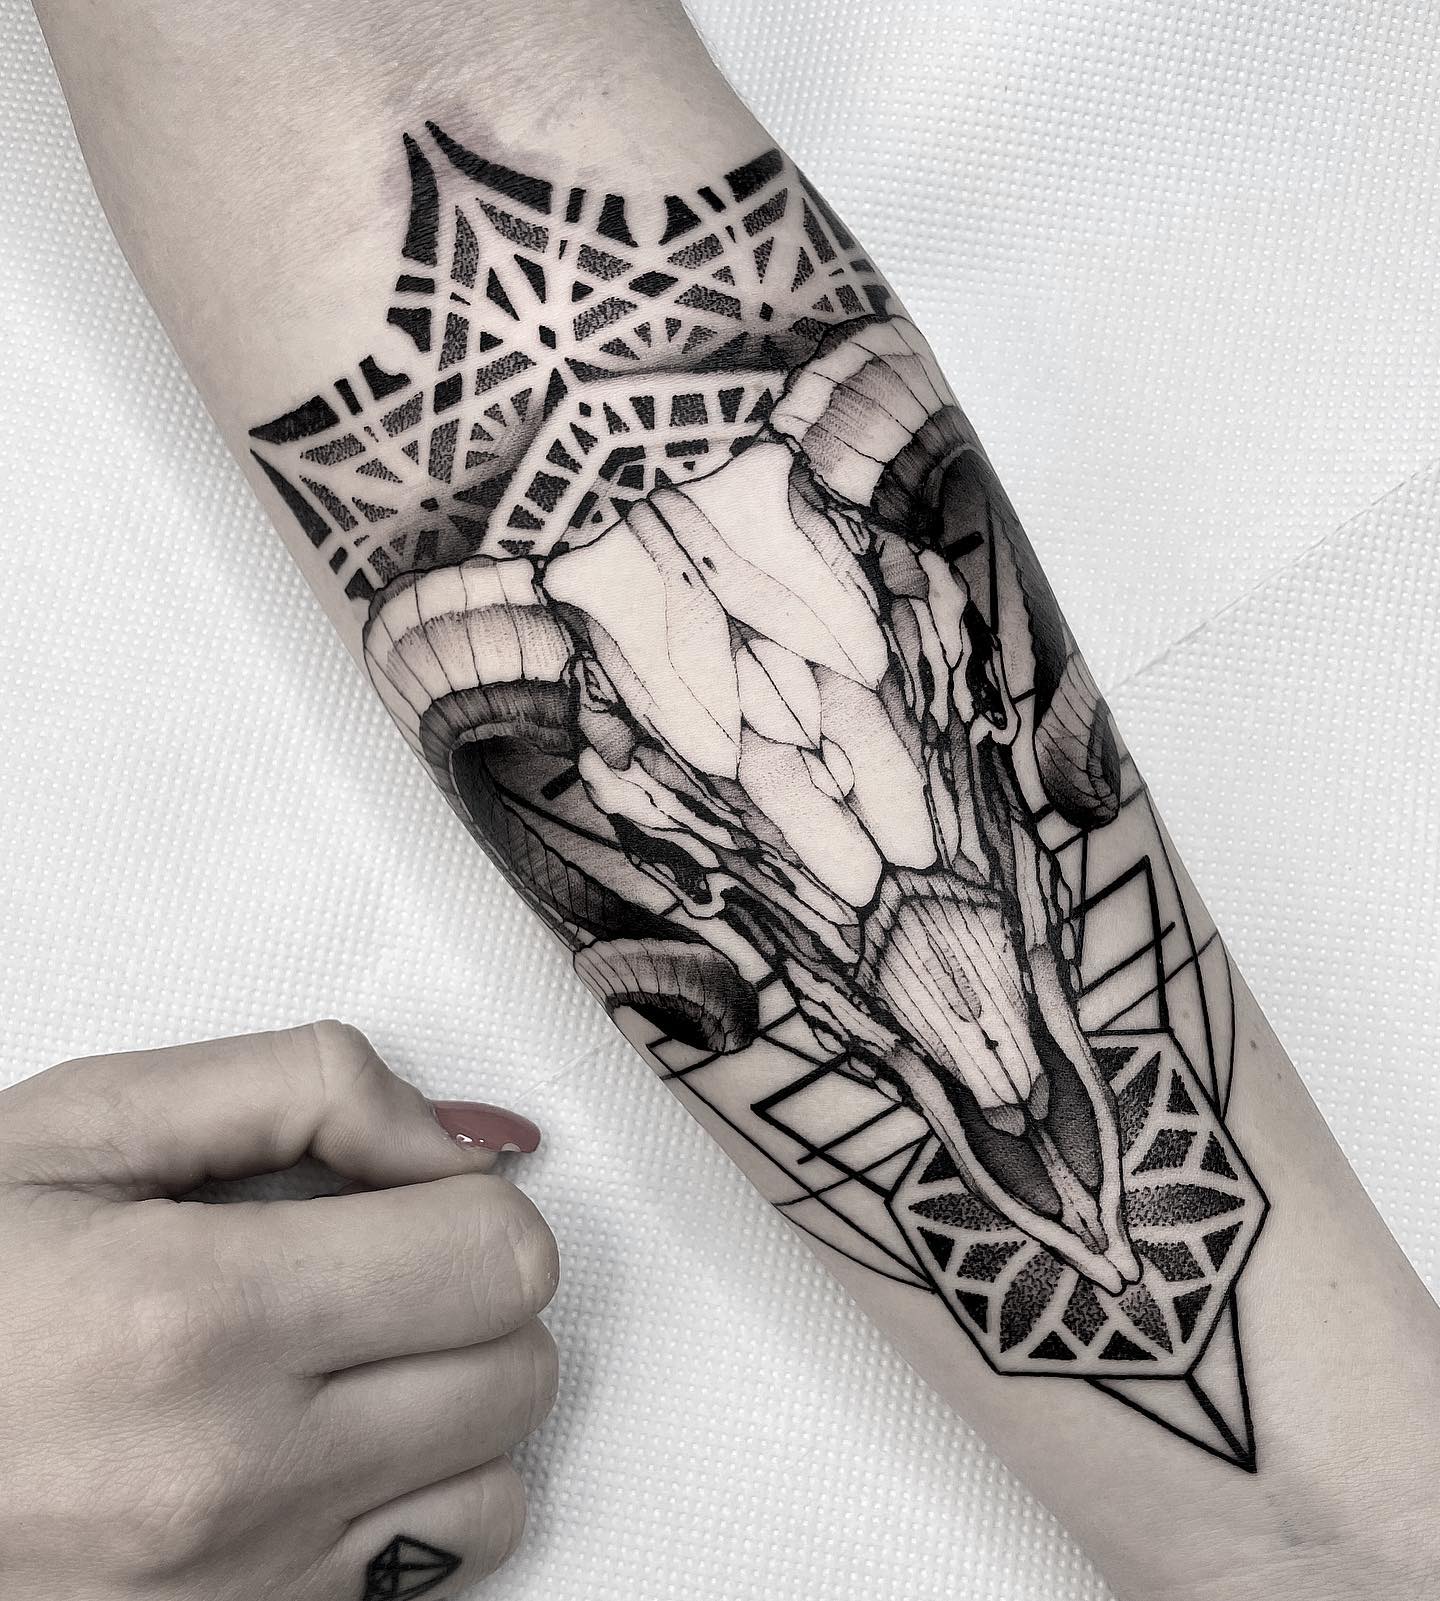 Geometric Tattoo Designs Meaning Symmetry and Creativity  Certified  Tattoo Studios